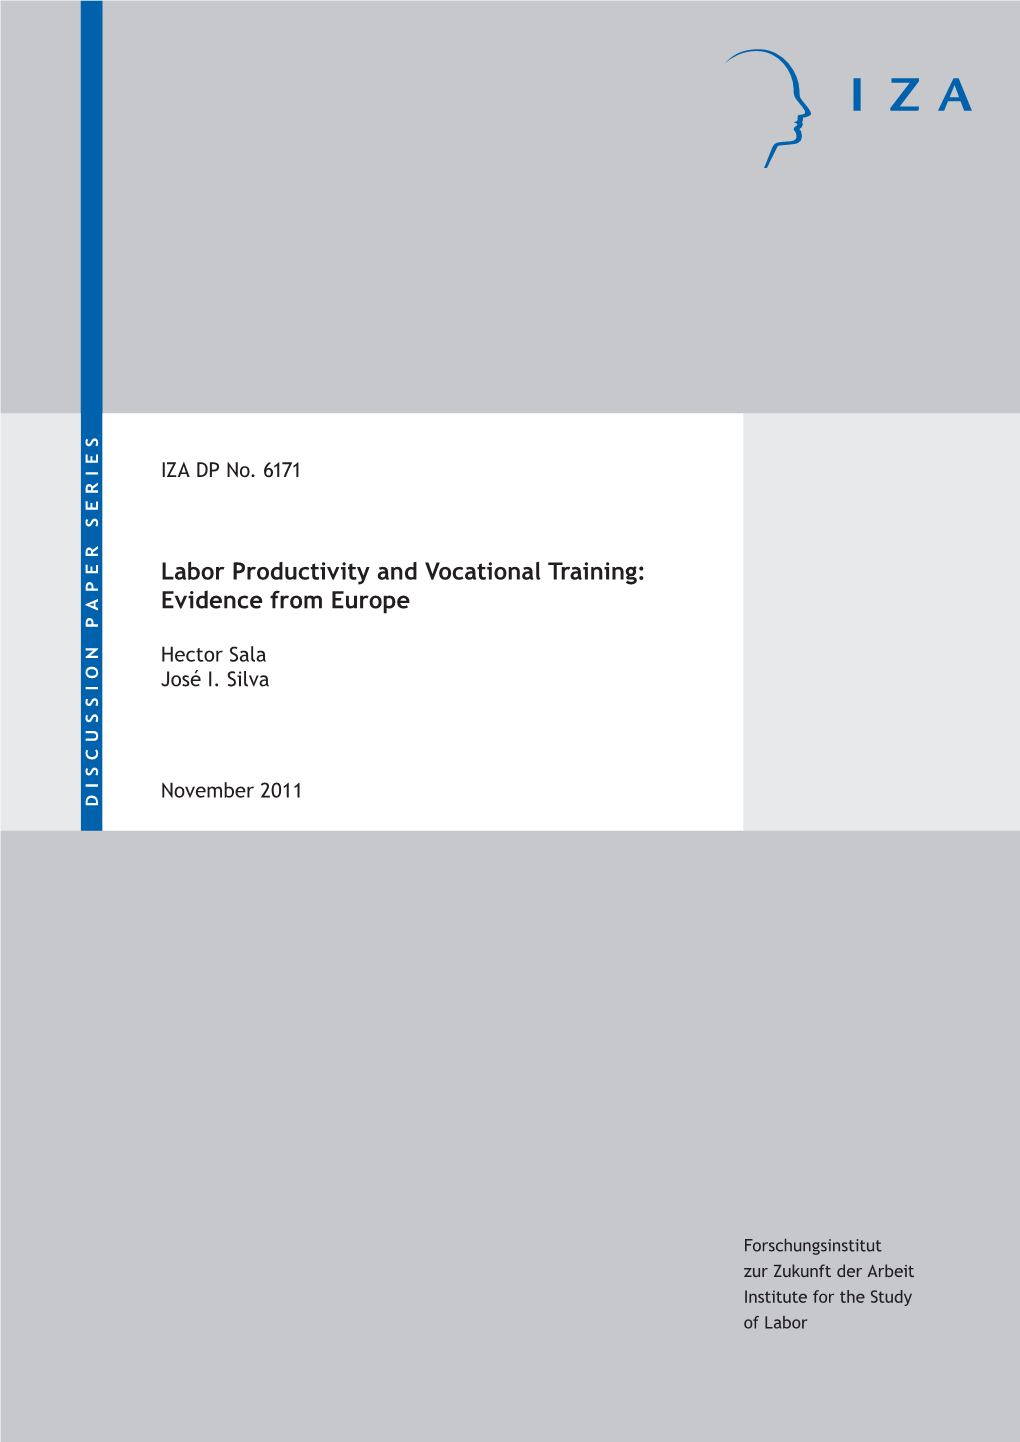 Labor Productivity and Vocational Training: Evidence from Europe